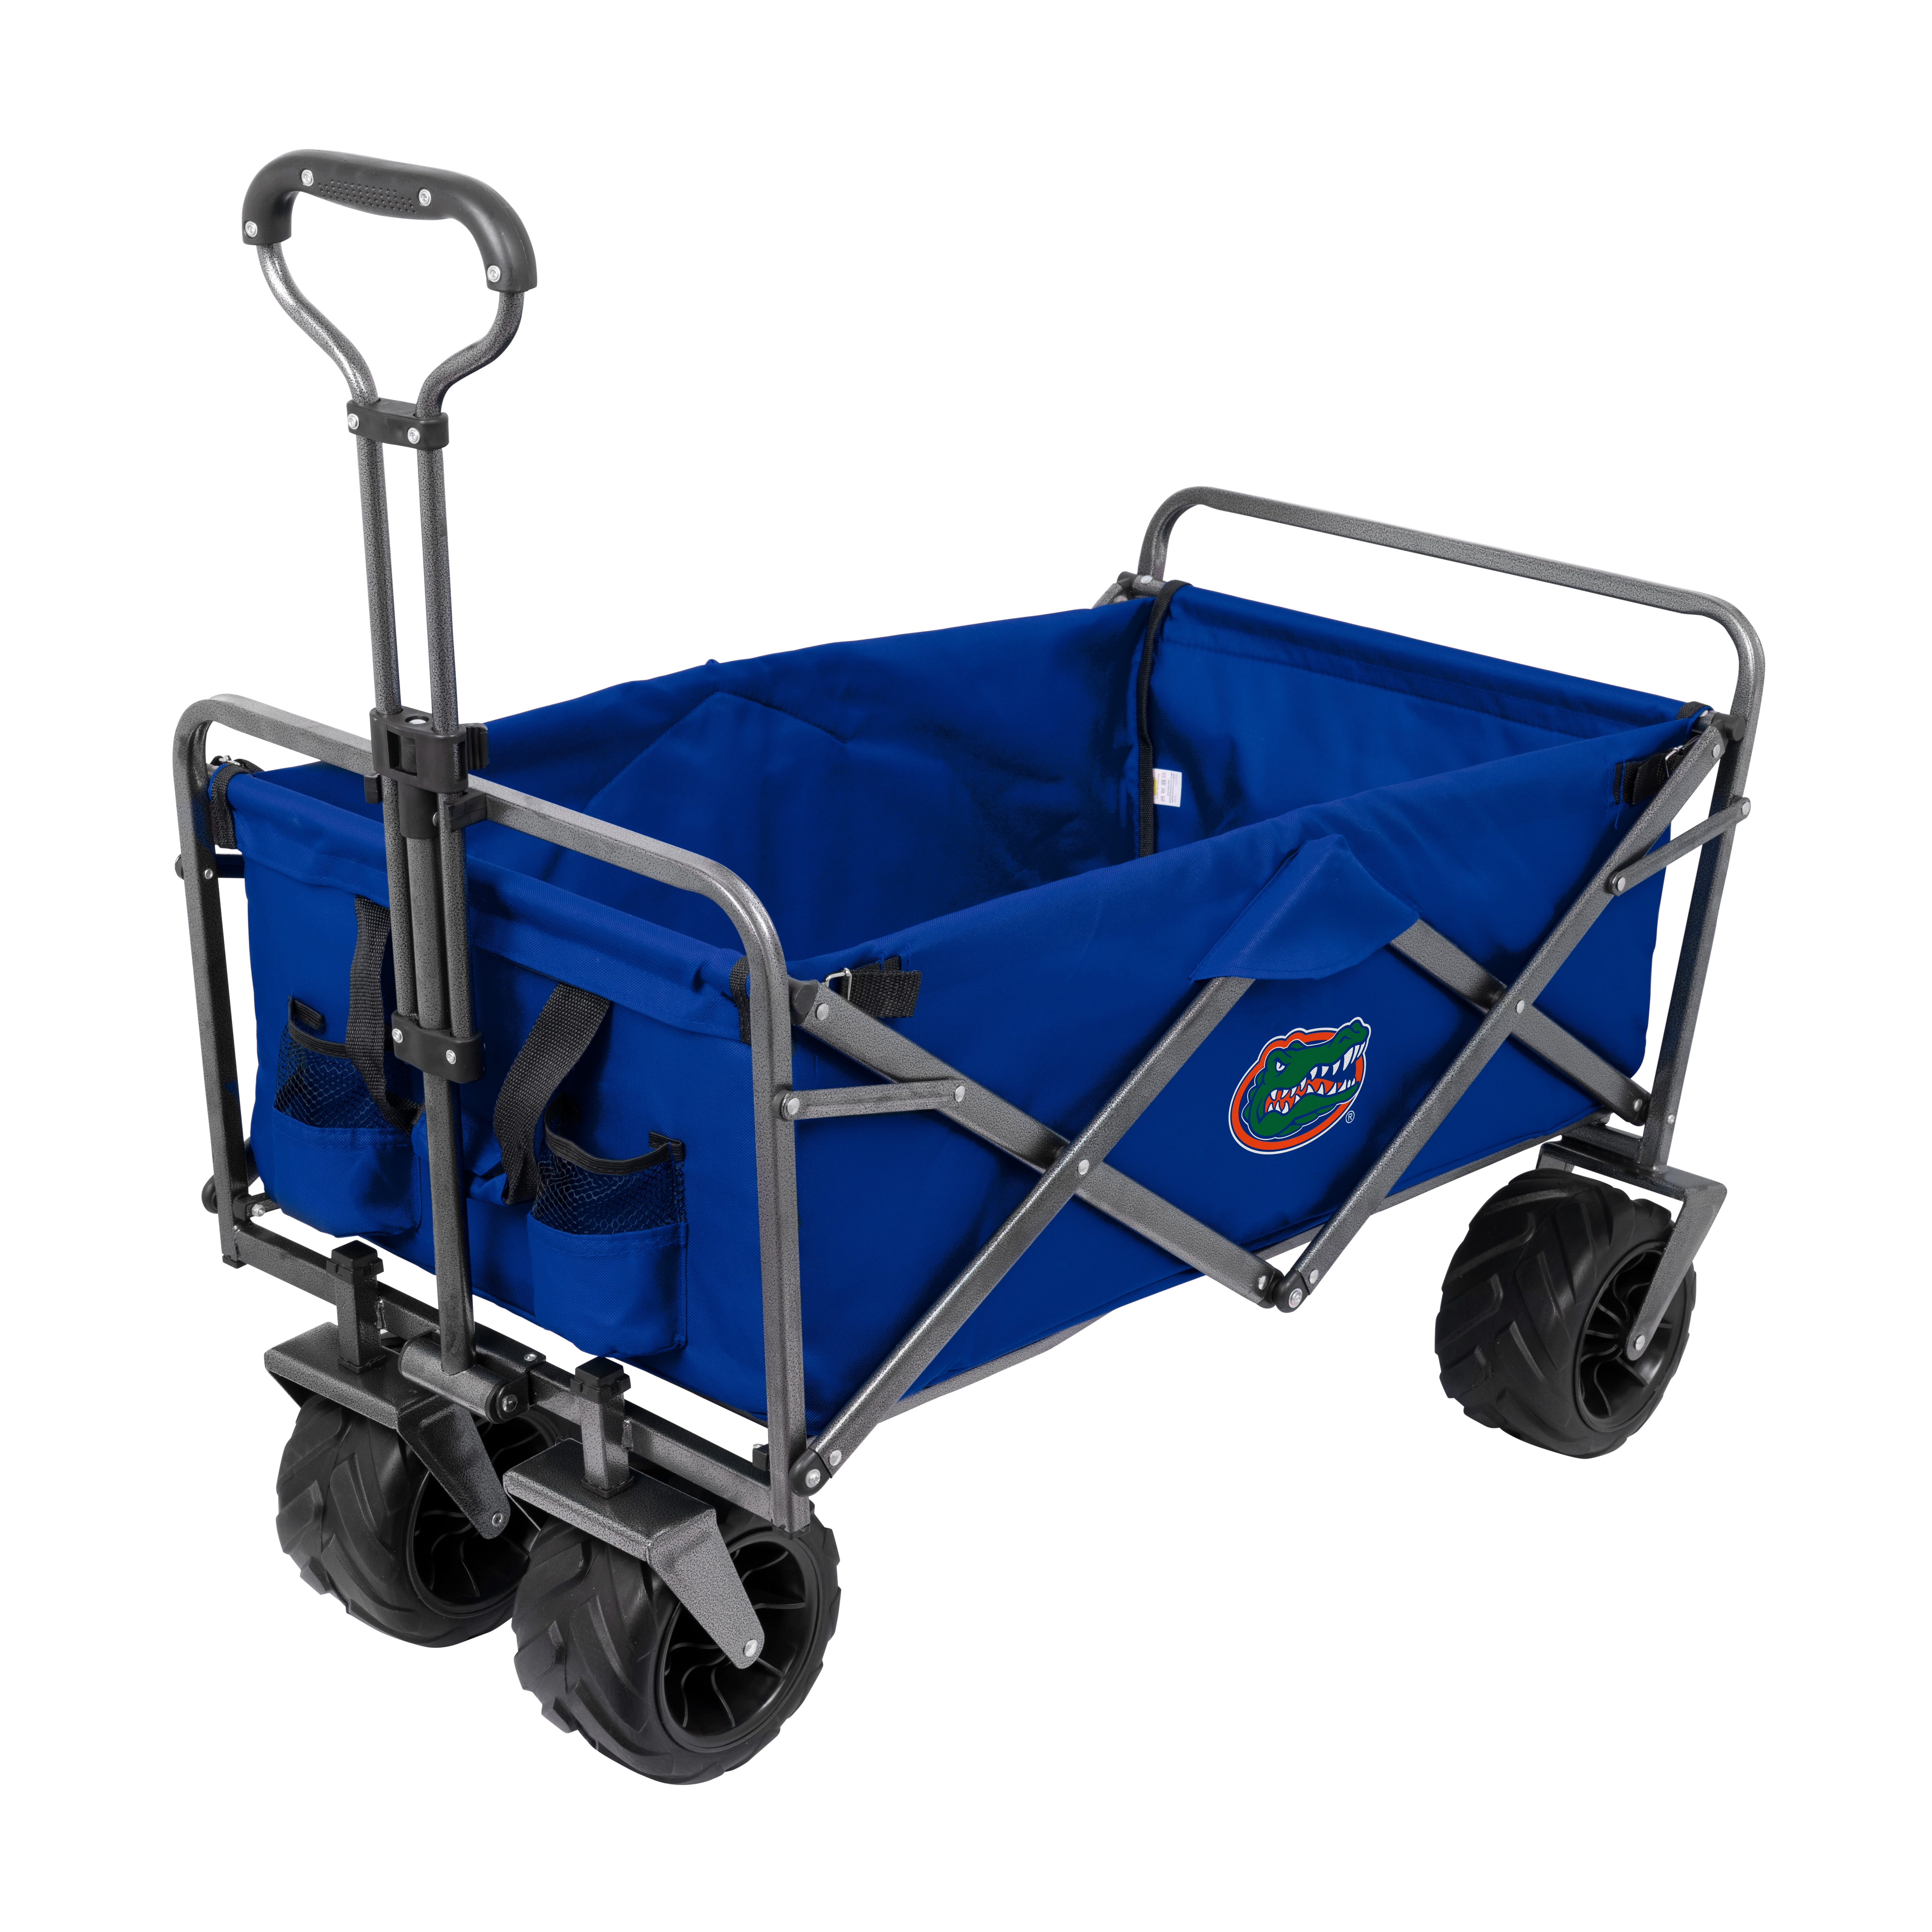 GDLF Fishing Cart Heavy Duty Foldable Collapsible Wagon Rod